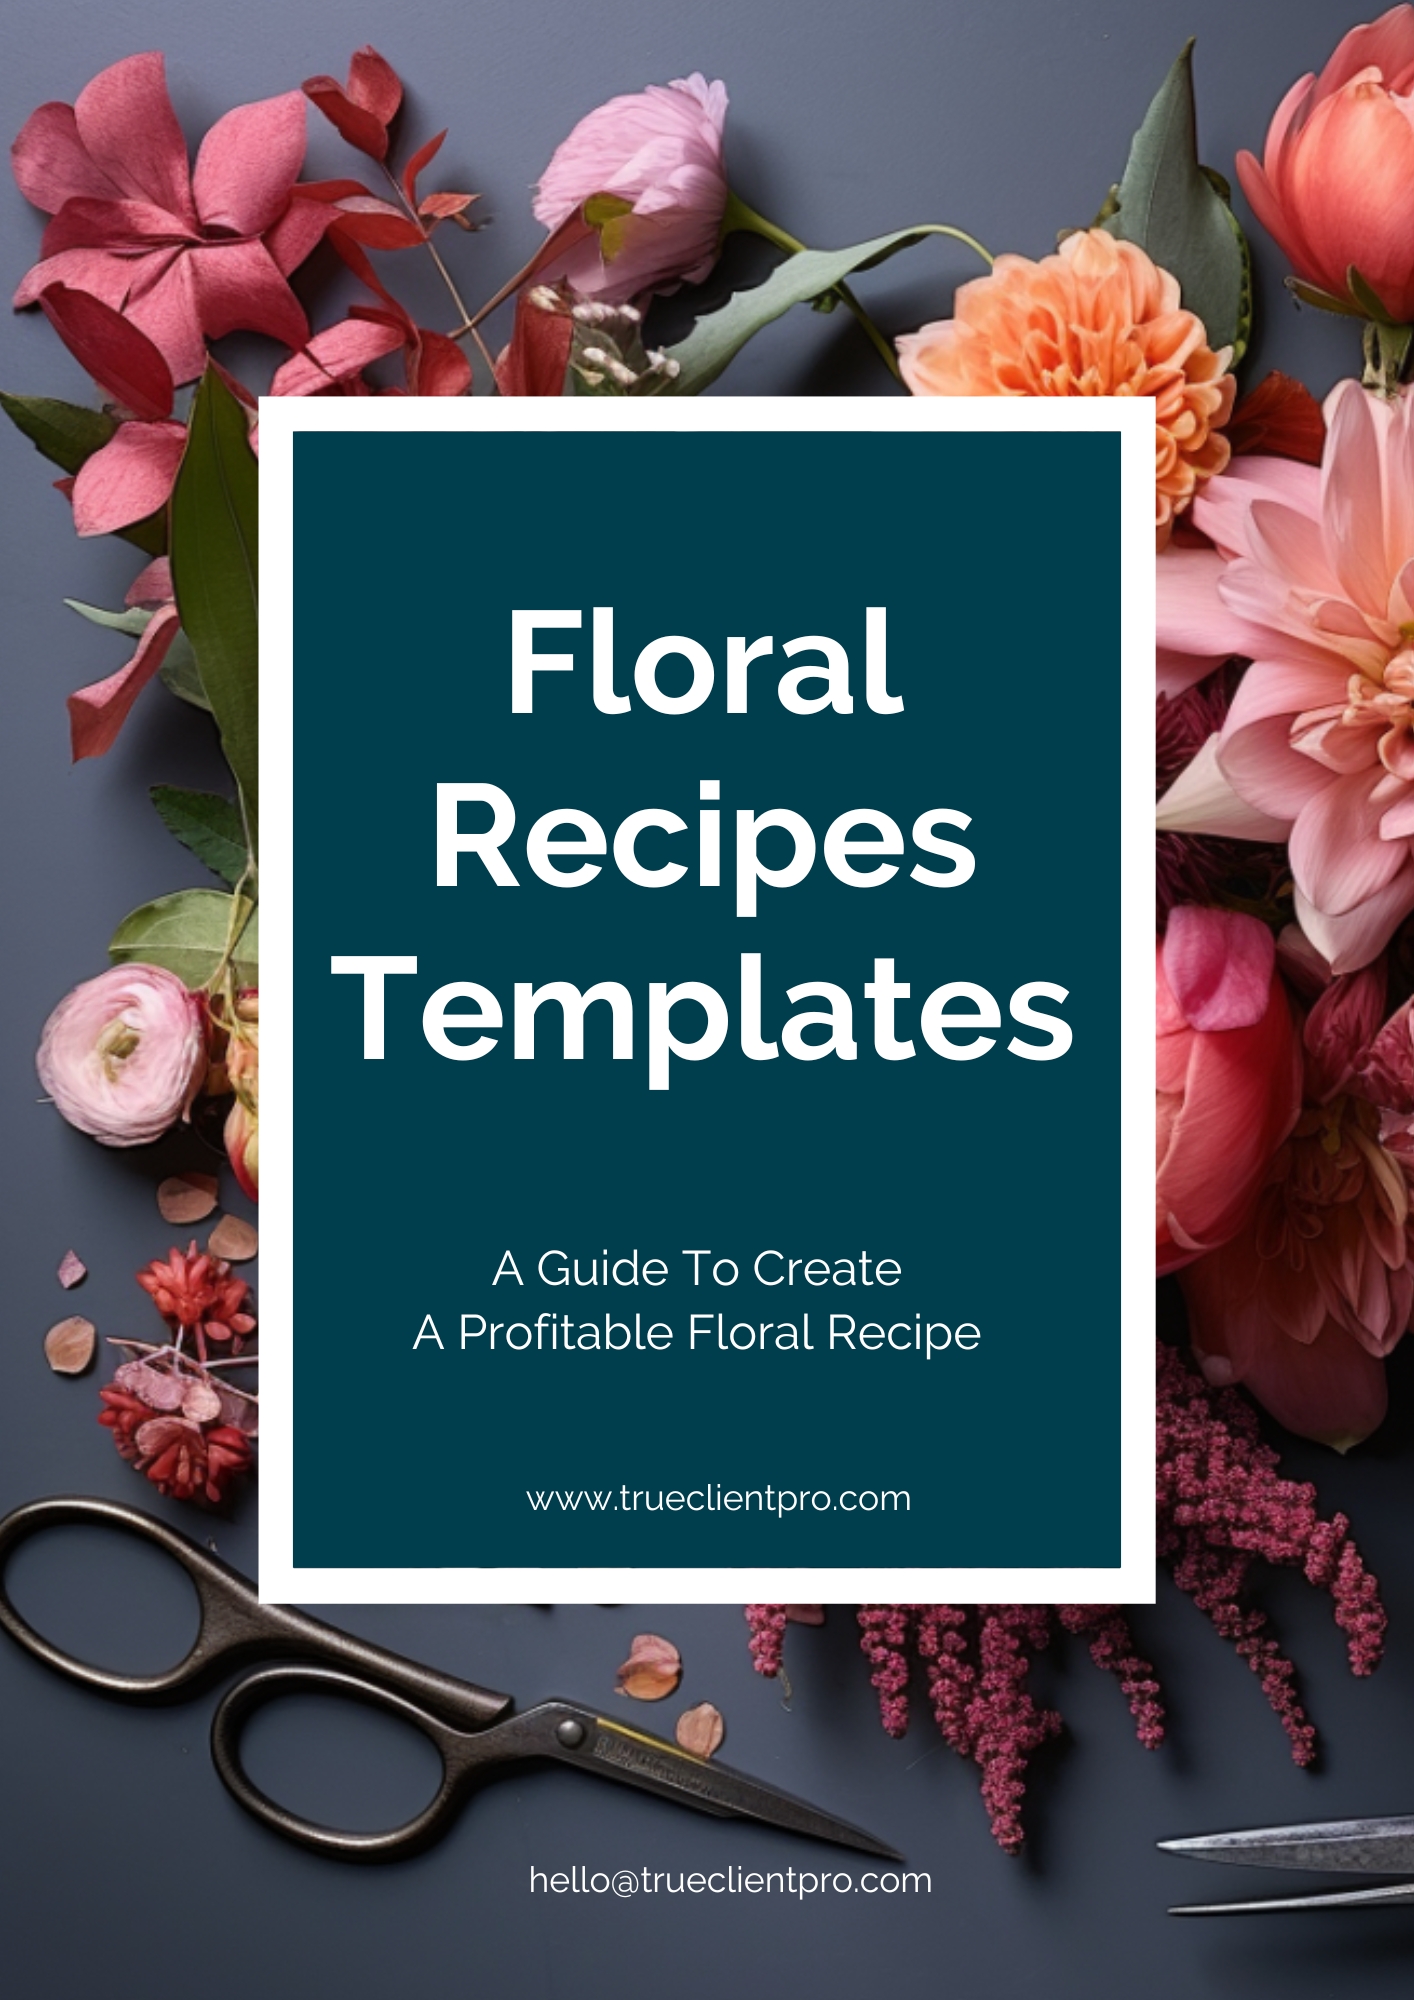 Floral Recipes template For Profitable Florists